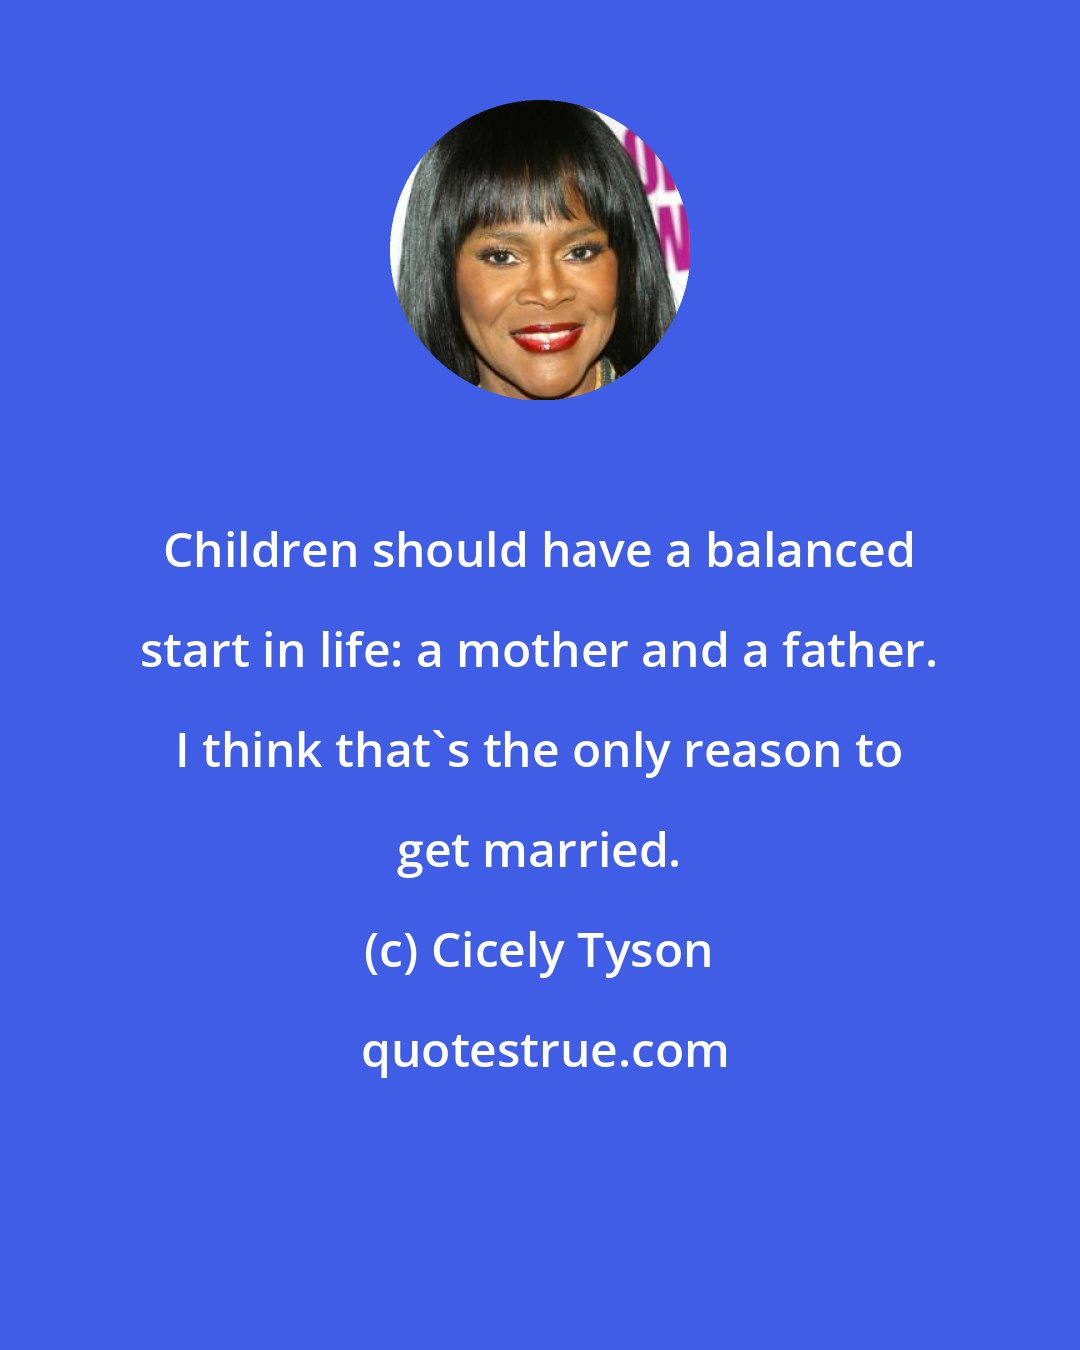 Cicely Tyson: Children should have a balanced start in life: a mother and a father. I think that's the only reason to get married.